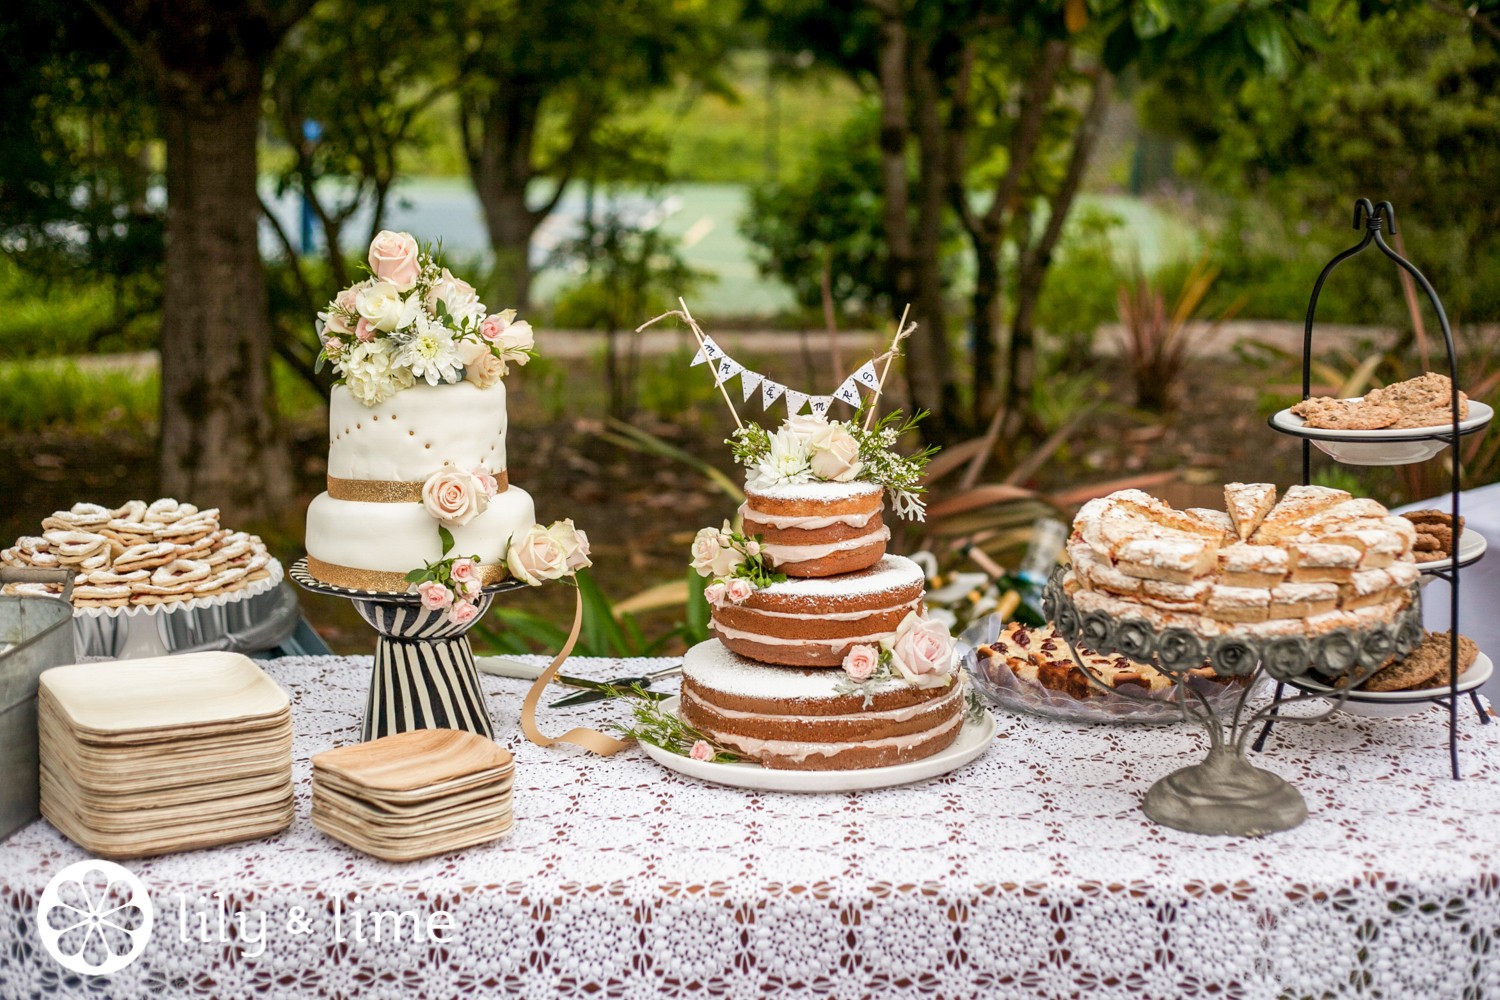 Choose a delicious flavored wedding cake to please all of your guests! -  Cross Creek Ranch FL